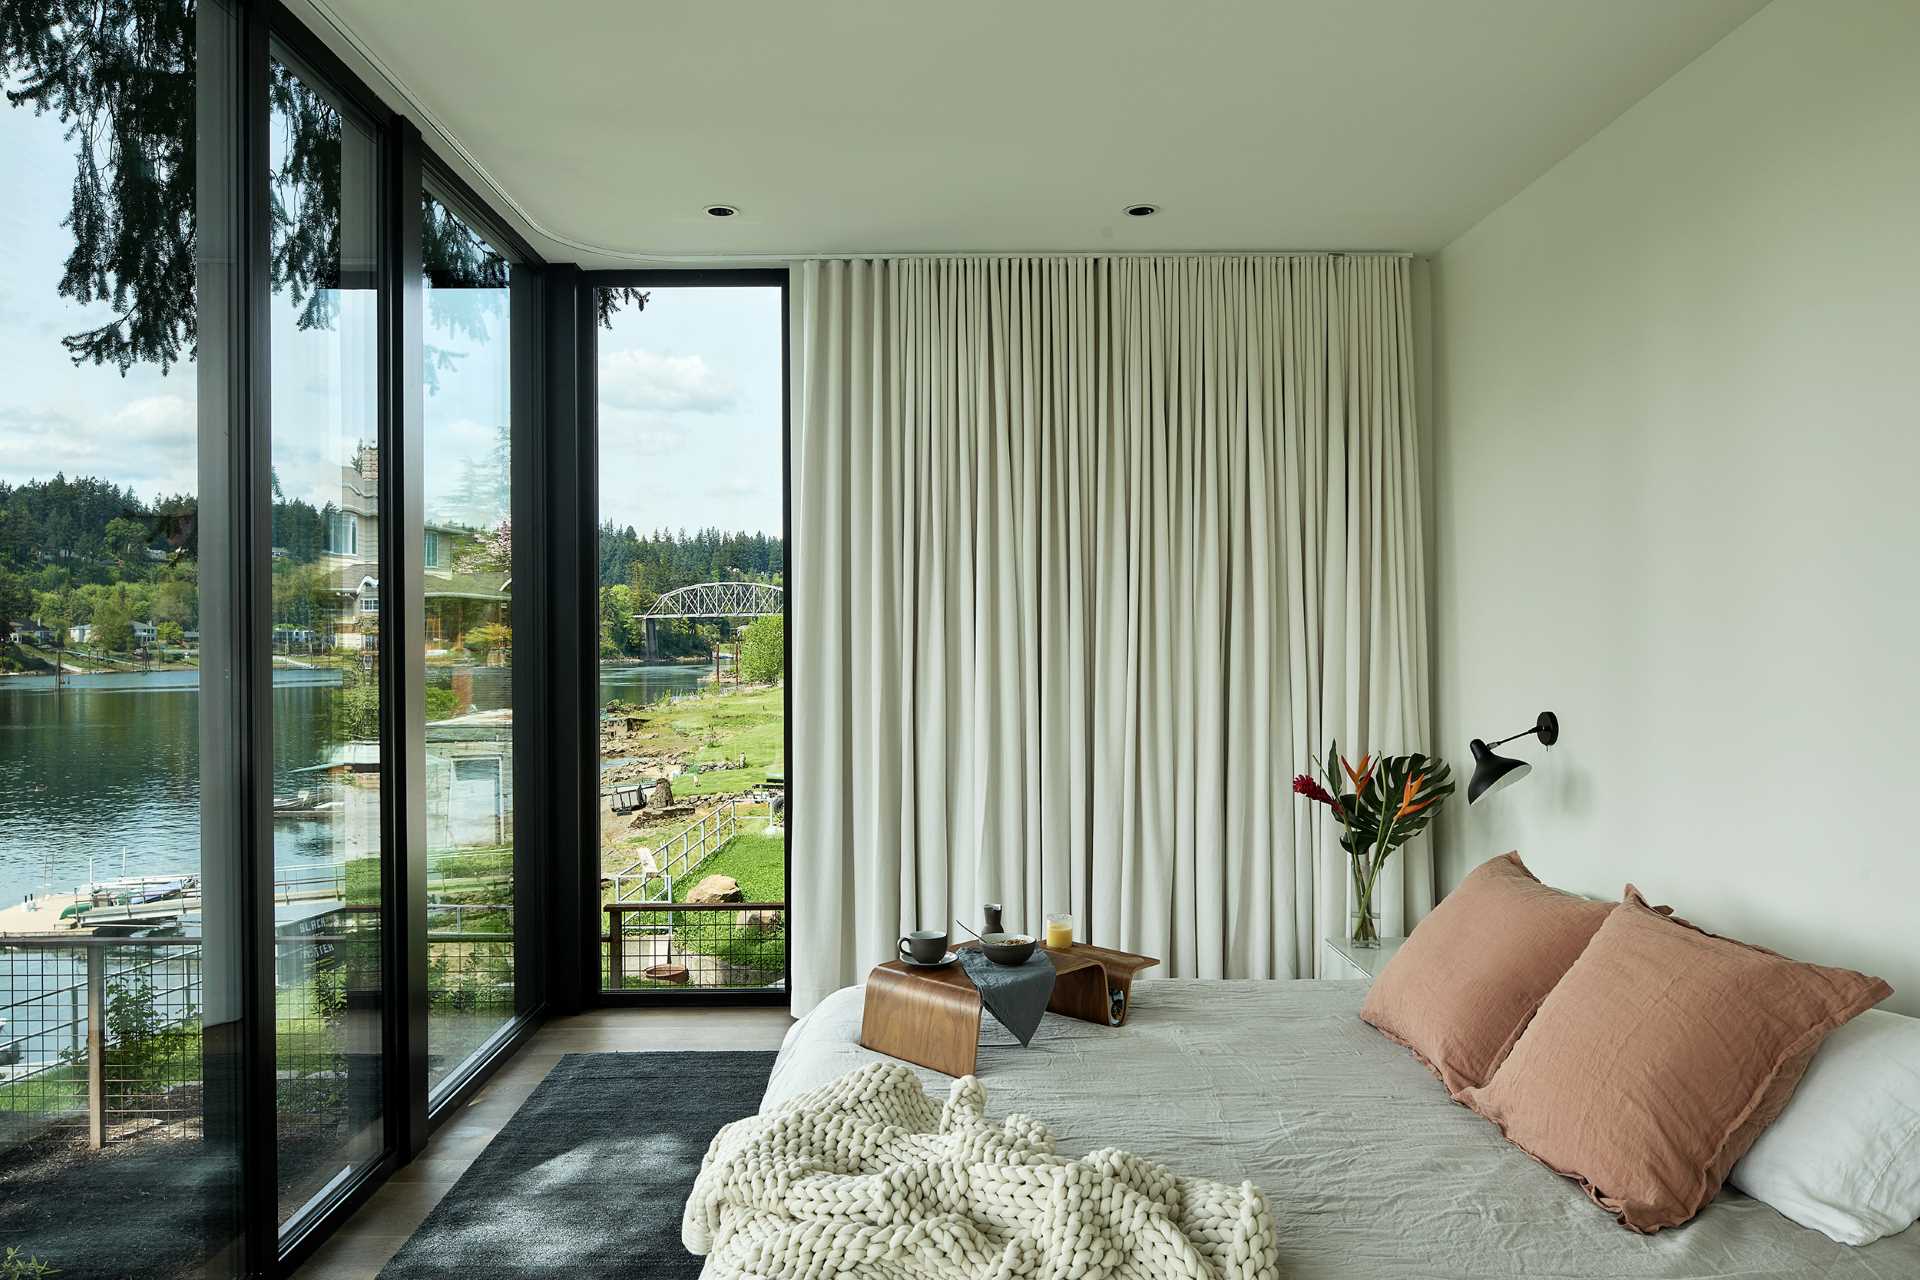 A modern bedroom with floor-to-ceiling windows.